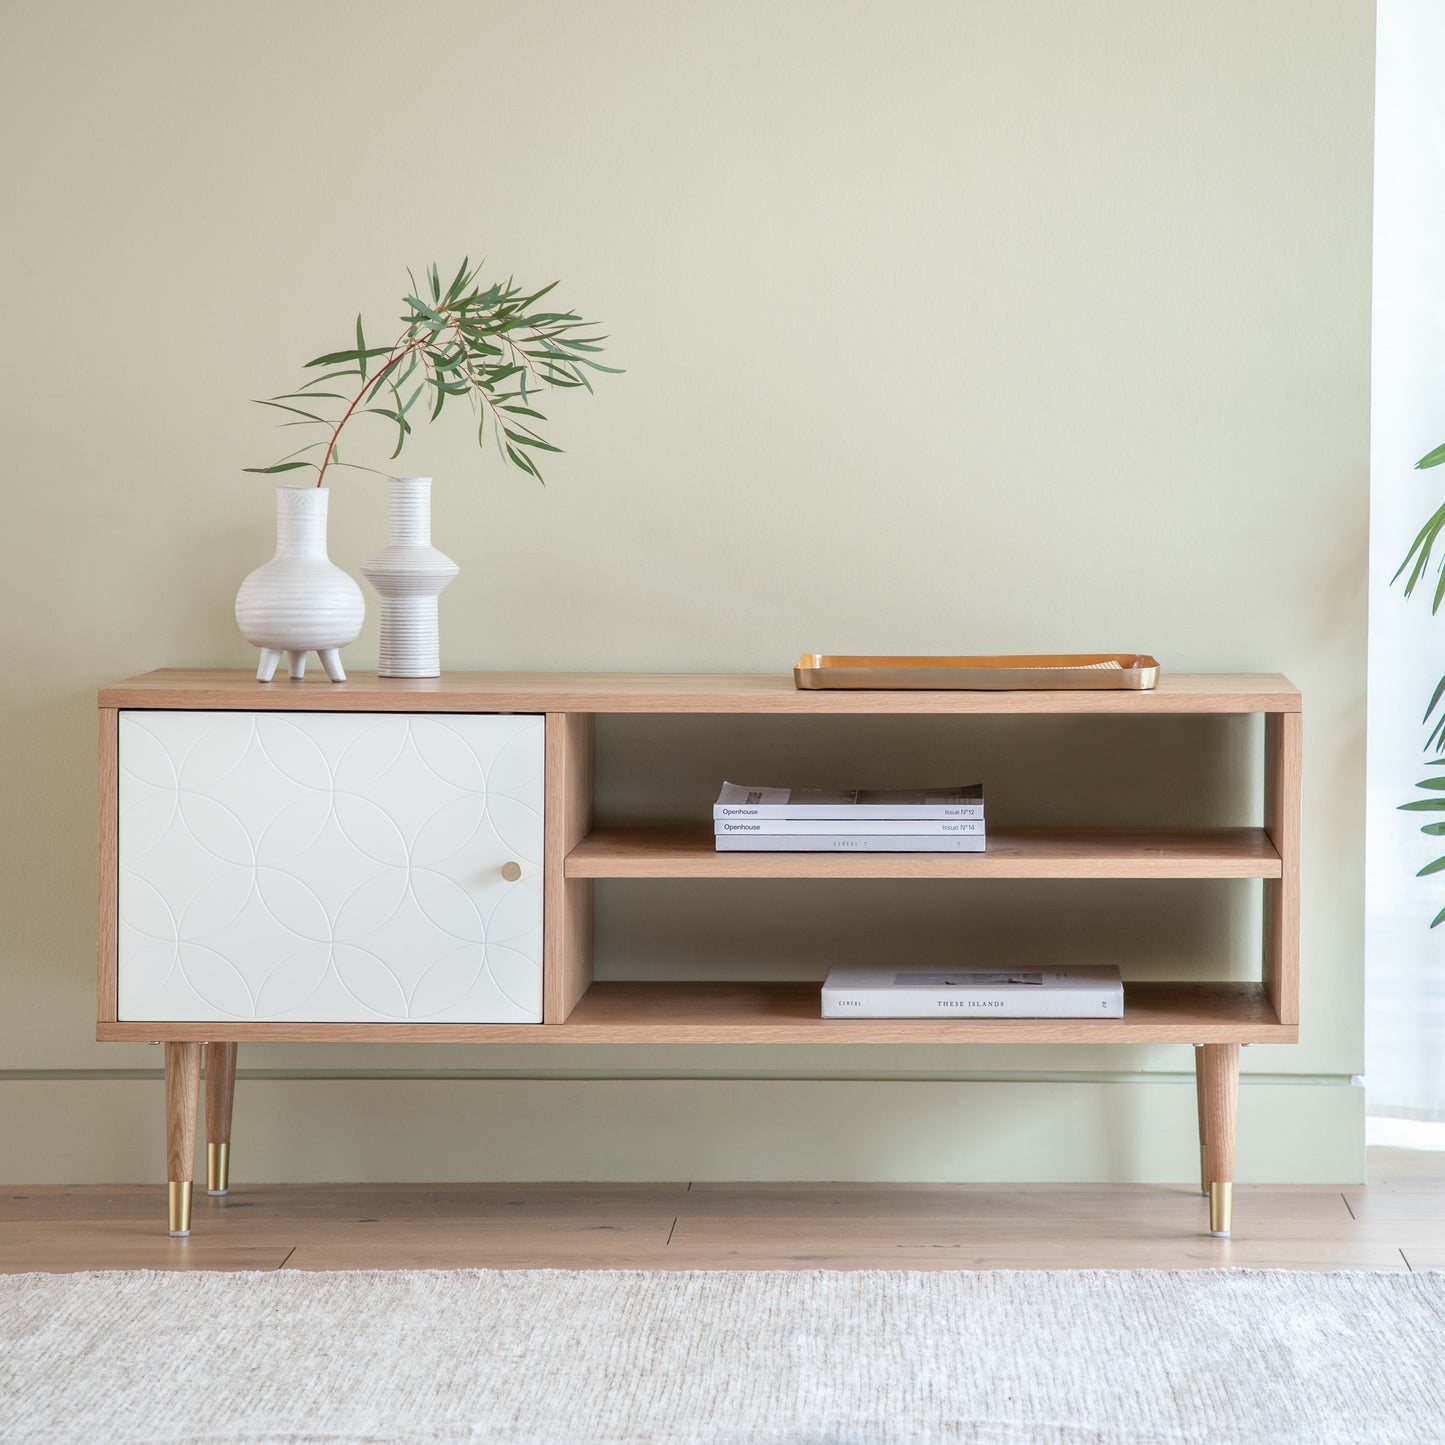 A stylish interior decor piece for your home with a plant on top – the Newbury Media Unit Oak White from Kikiathome.co.uk.